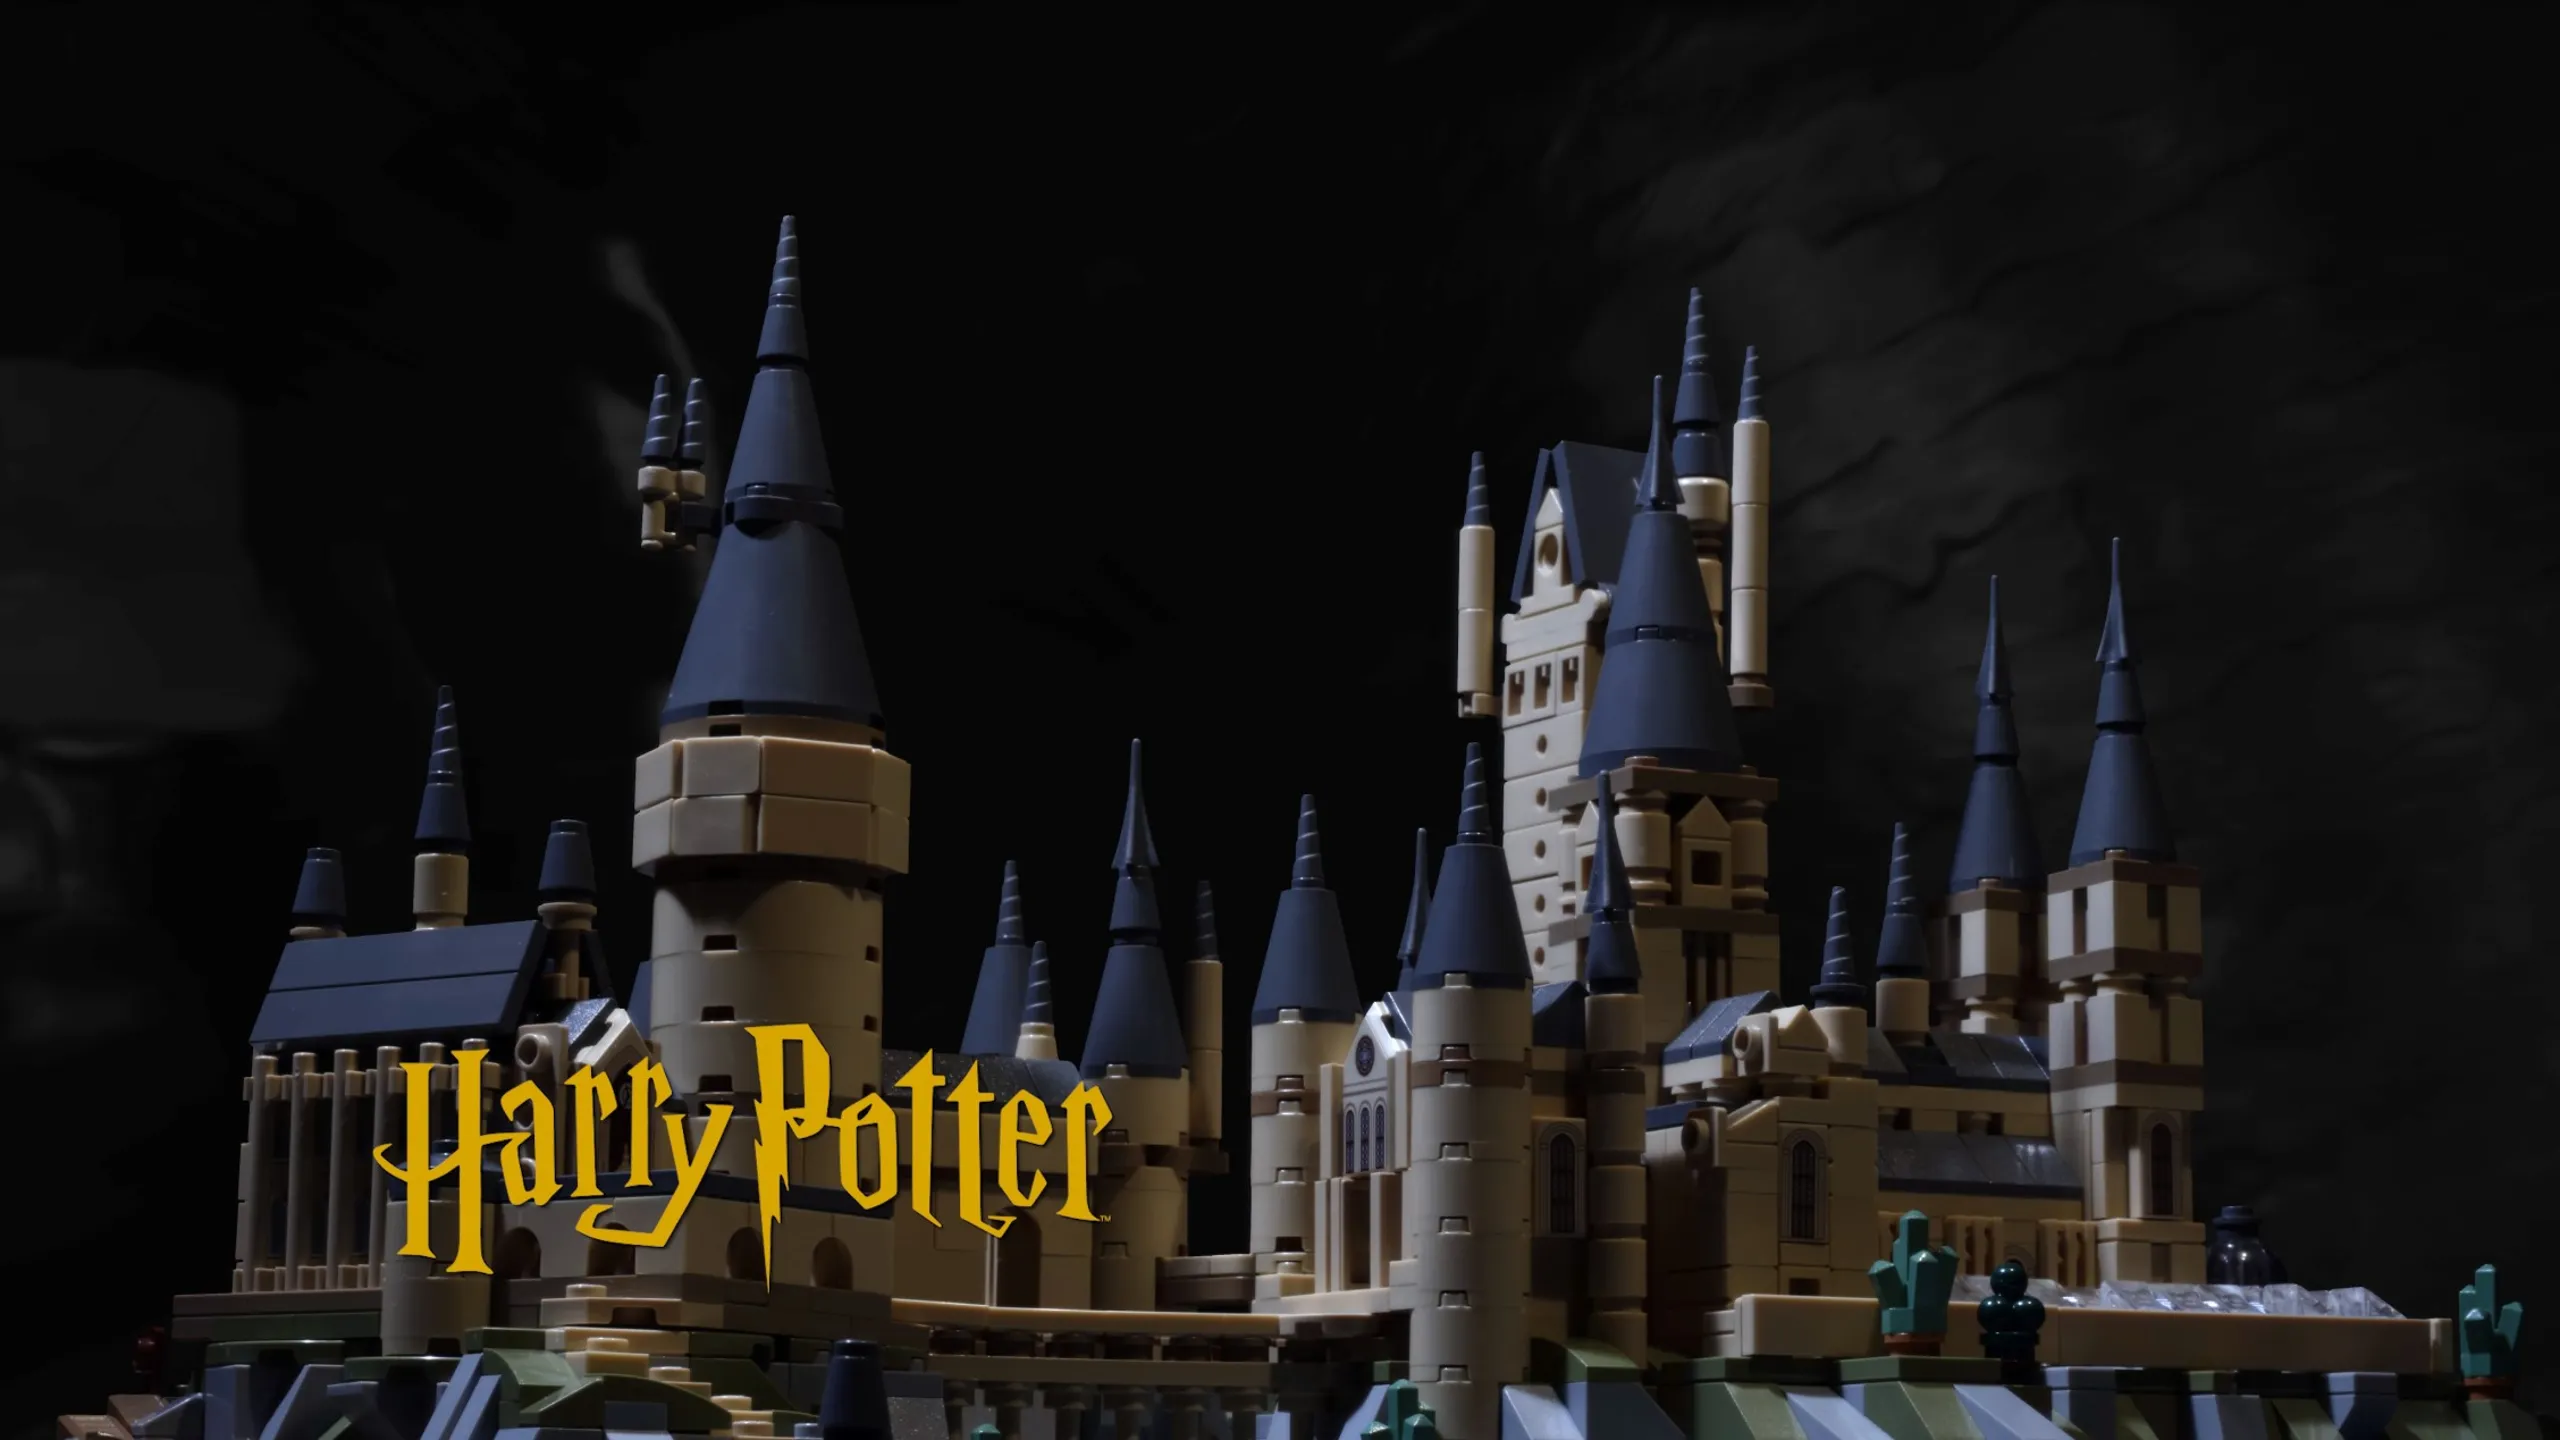 Lego Harry Potter Hogwarts Castle: Cast your eye on the magical